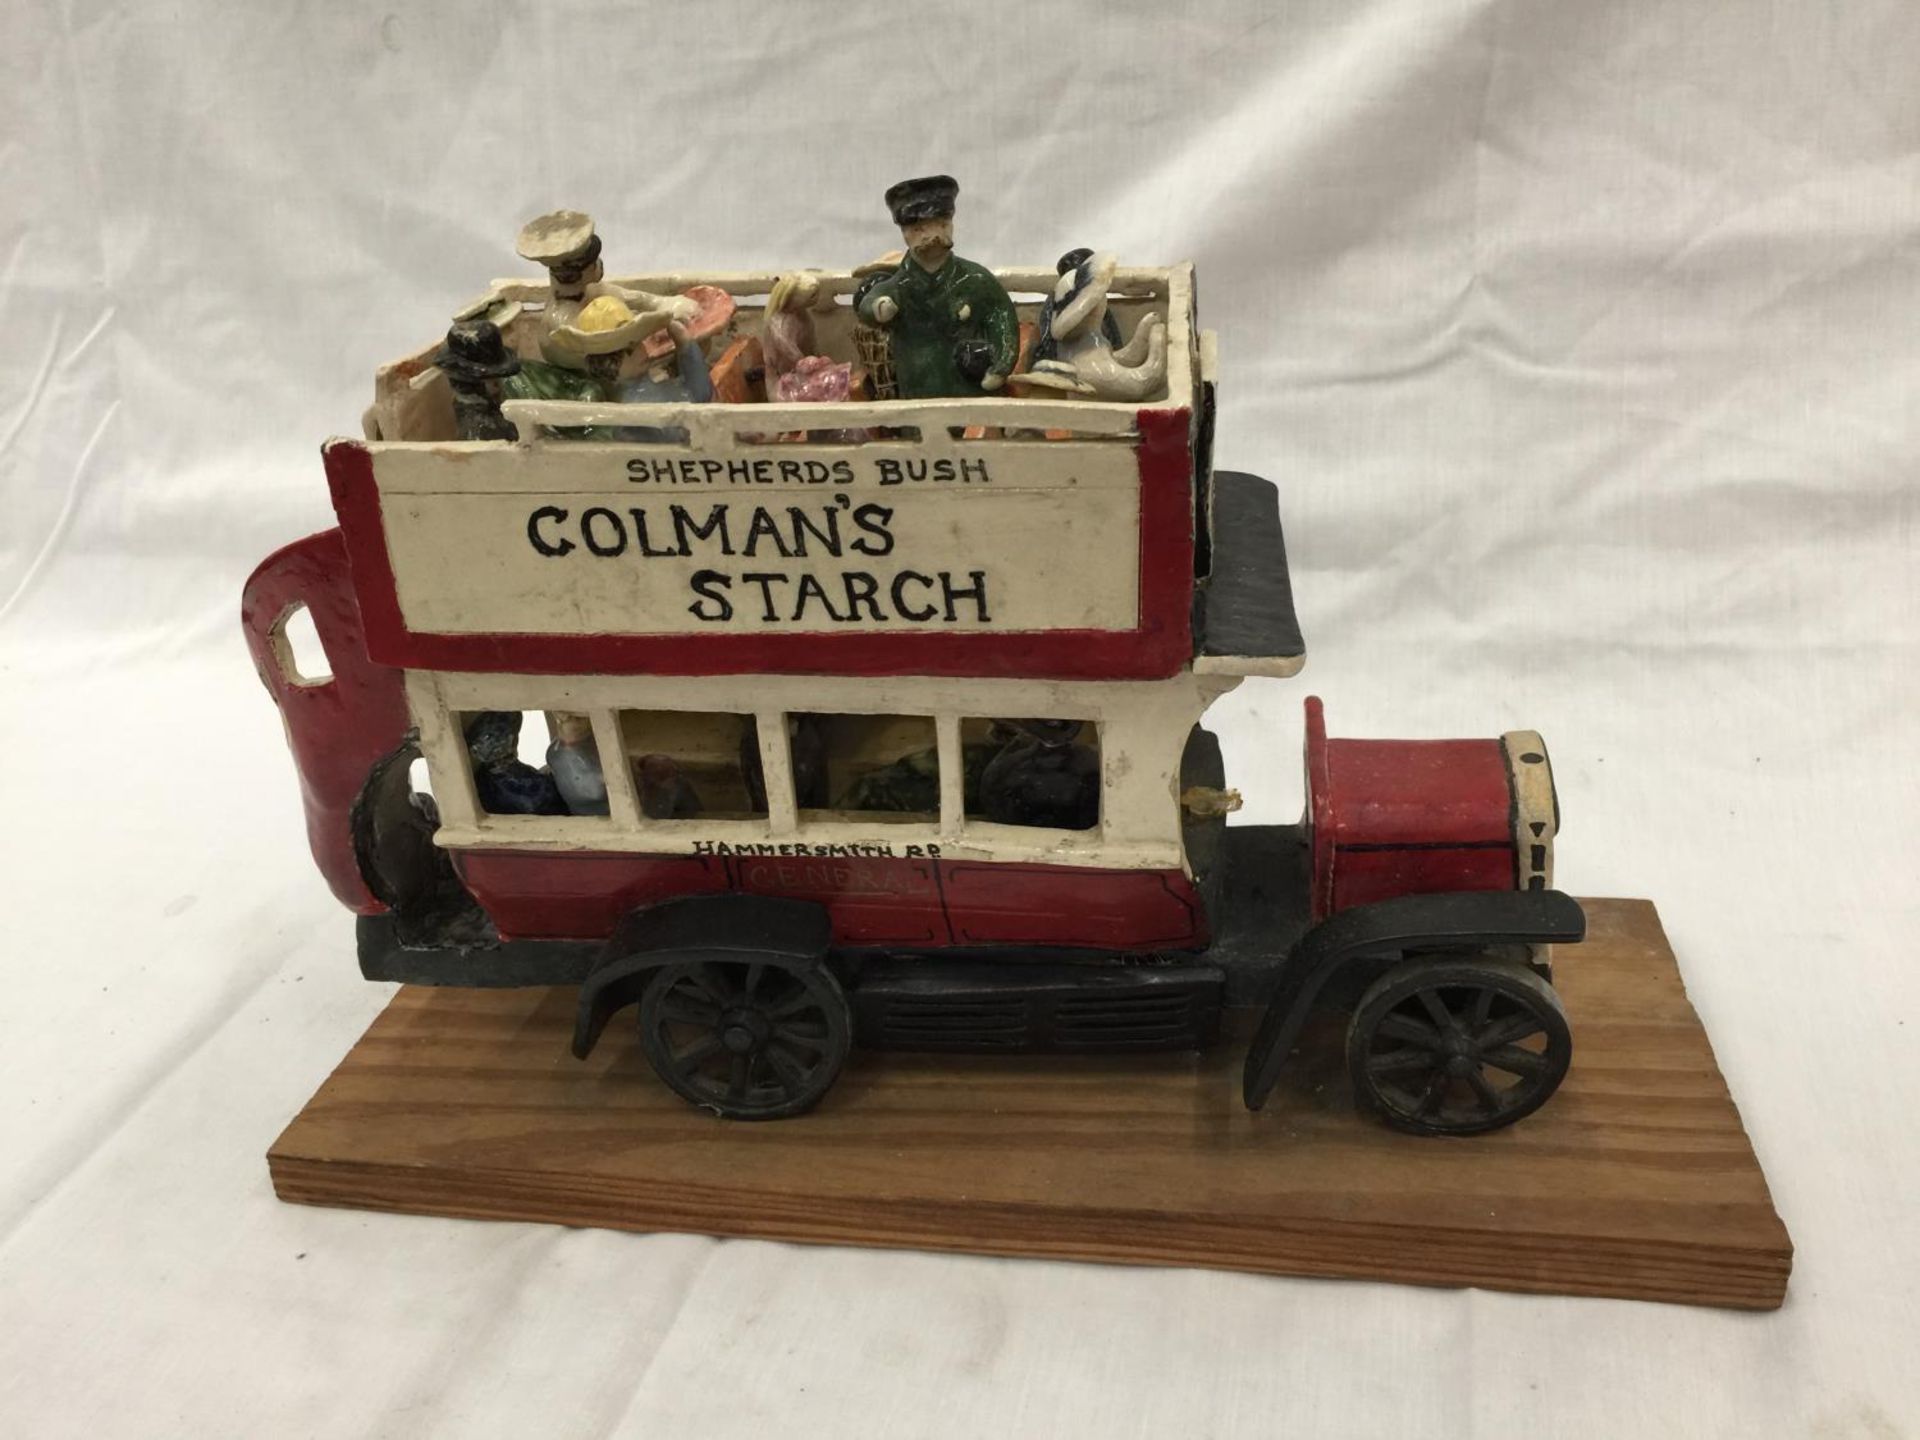 A VINTAGE SHEPHERD'S BUSH TROLLEY BUS ADVERTISING 'COLMAN'S STARCH AND PEAR'S SOAP WITH PEOPLE - Image 5 of 6